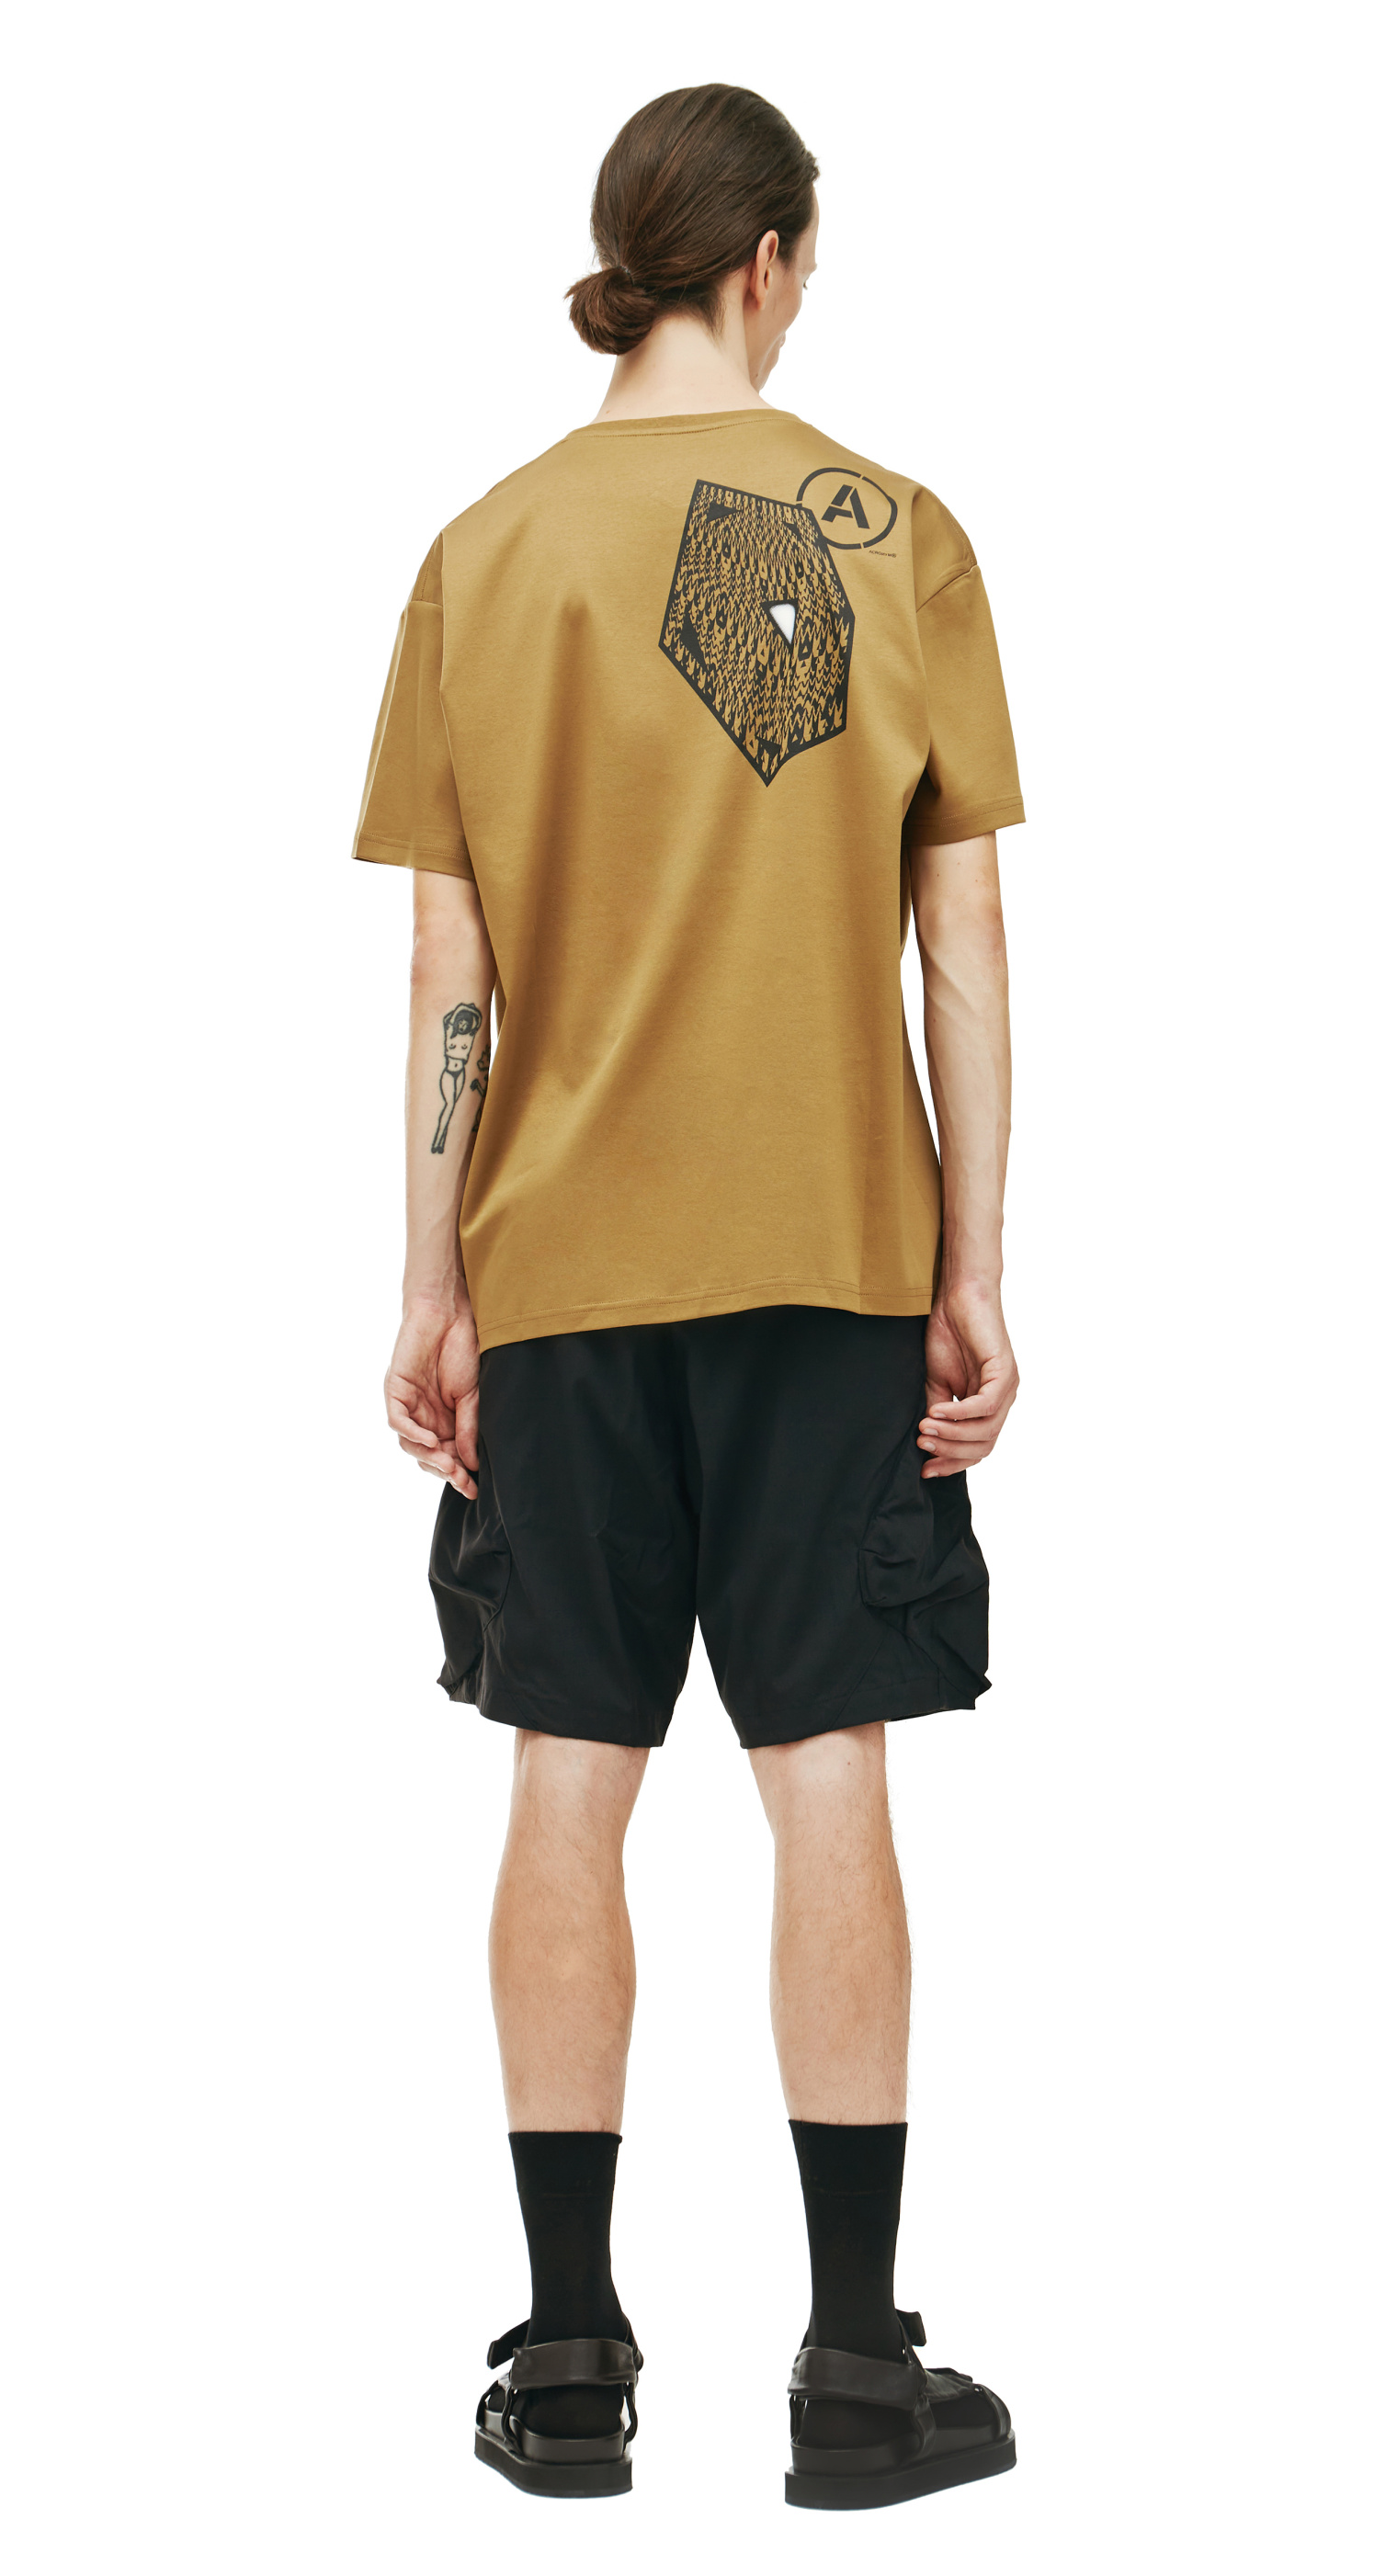 Acronym S24 graphic print t-shirt in coyote